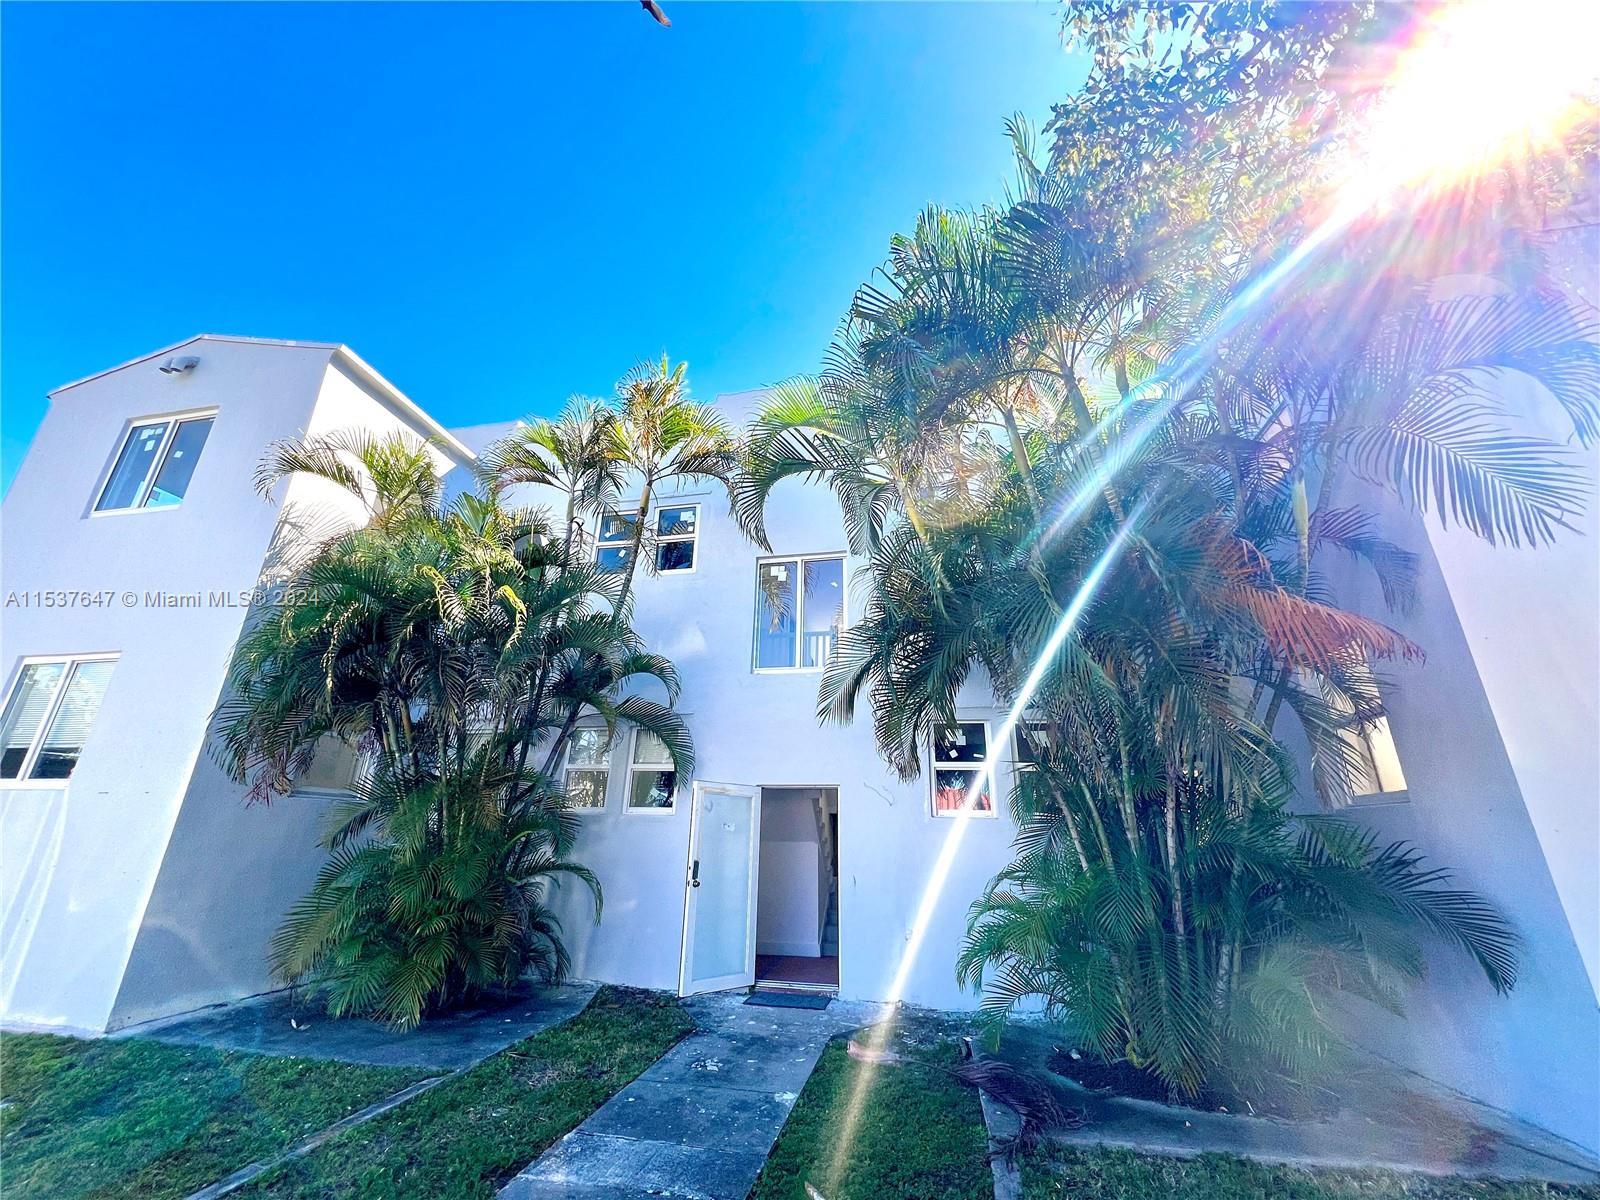 Photo of 1015 S 17th Ave #7 in Hollywood, FL